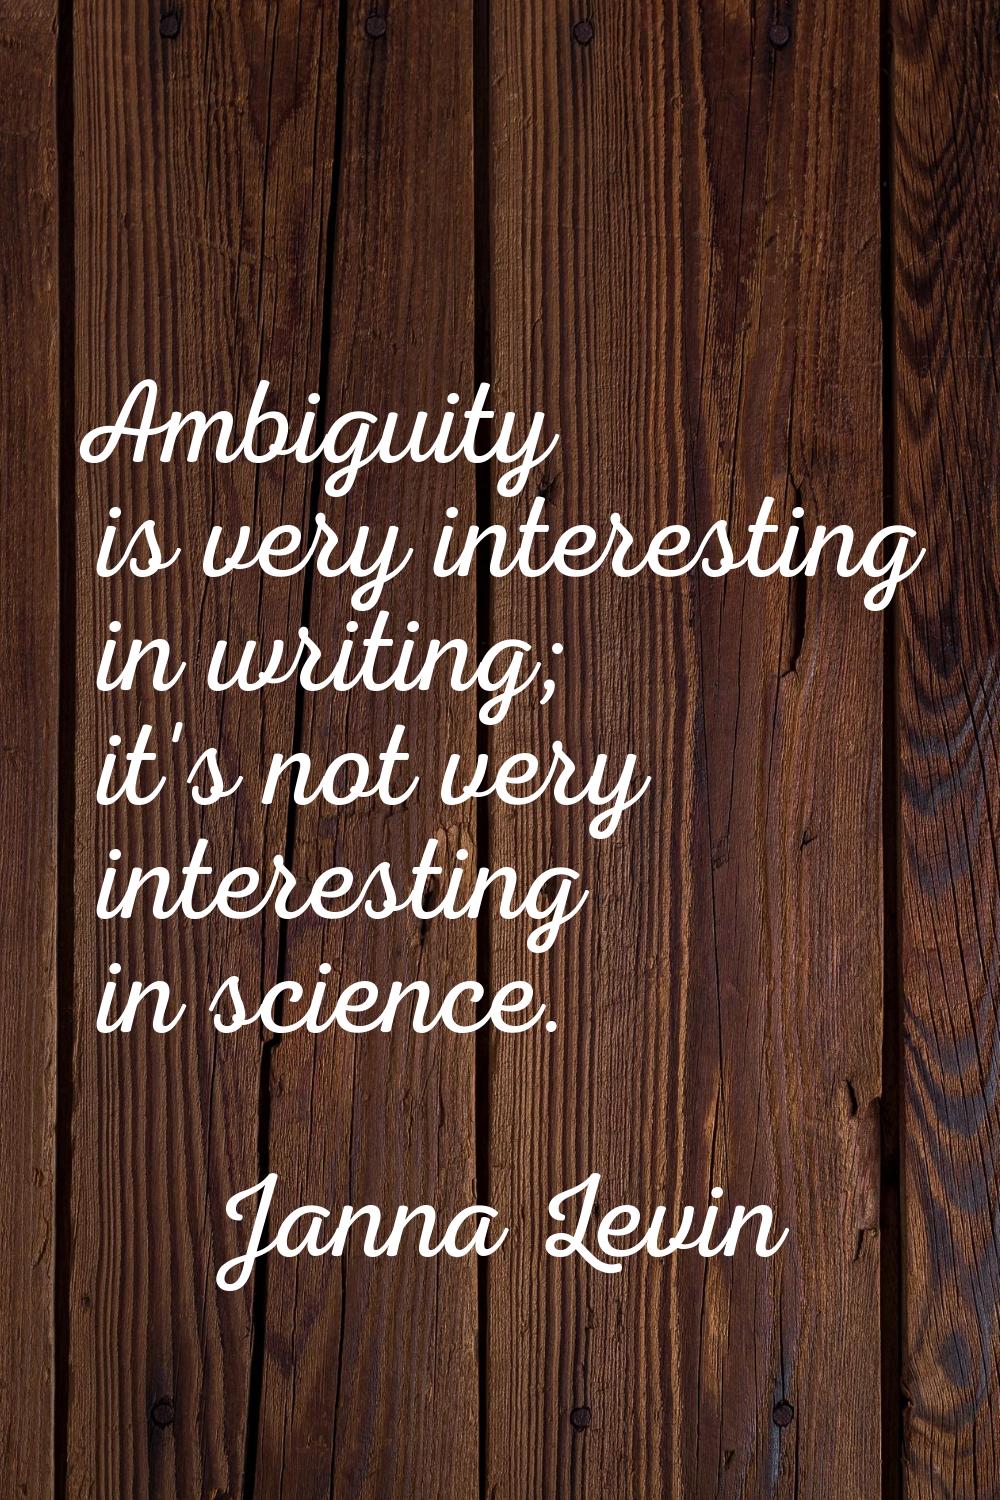 Ambiguity is very interesting in writing; it's not very interesting in science.